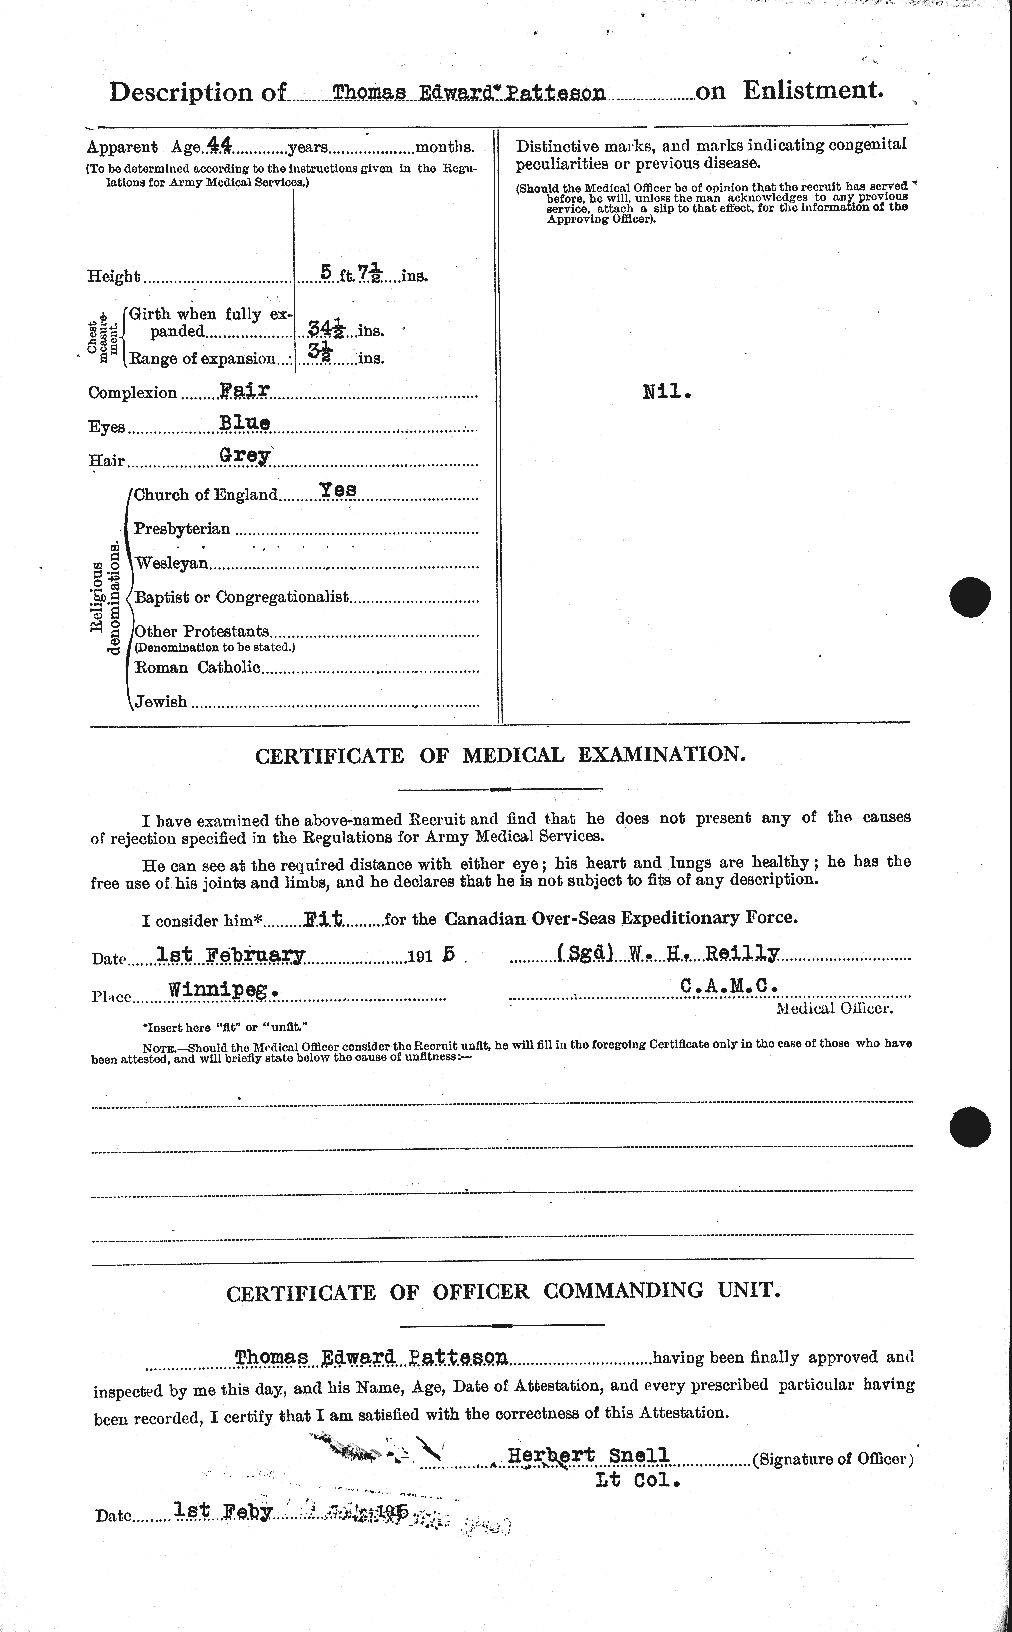 Personnel Records of the First World War - CEF 568889b